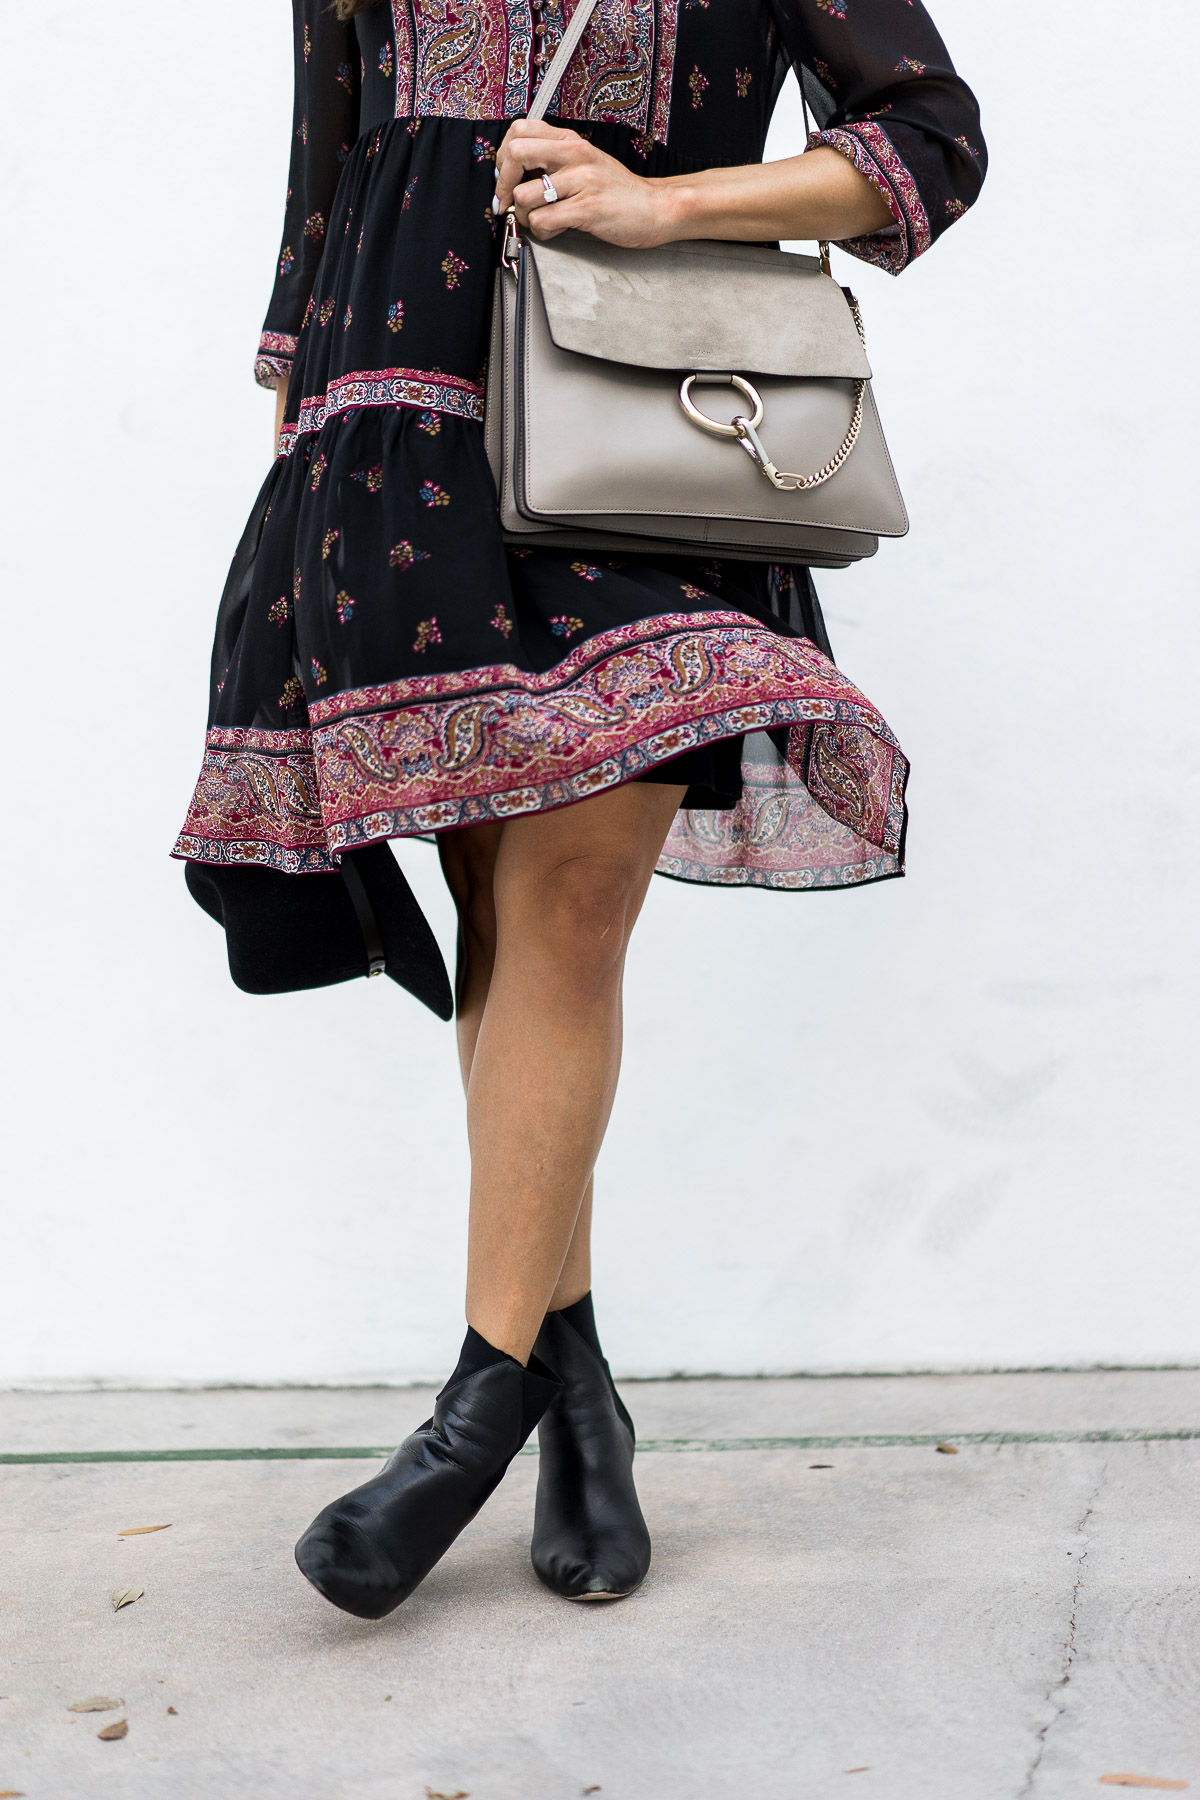 A Glam Lifestyle blogger shares her boho style in Joie Alpina dress carrying Chloe Faye bag and completing the look in ASKA Troy booties